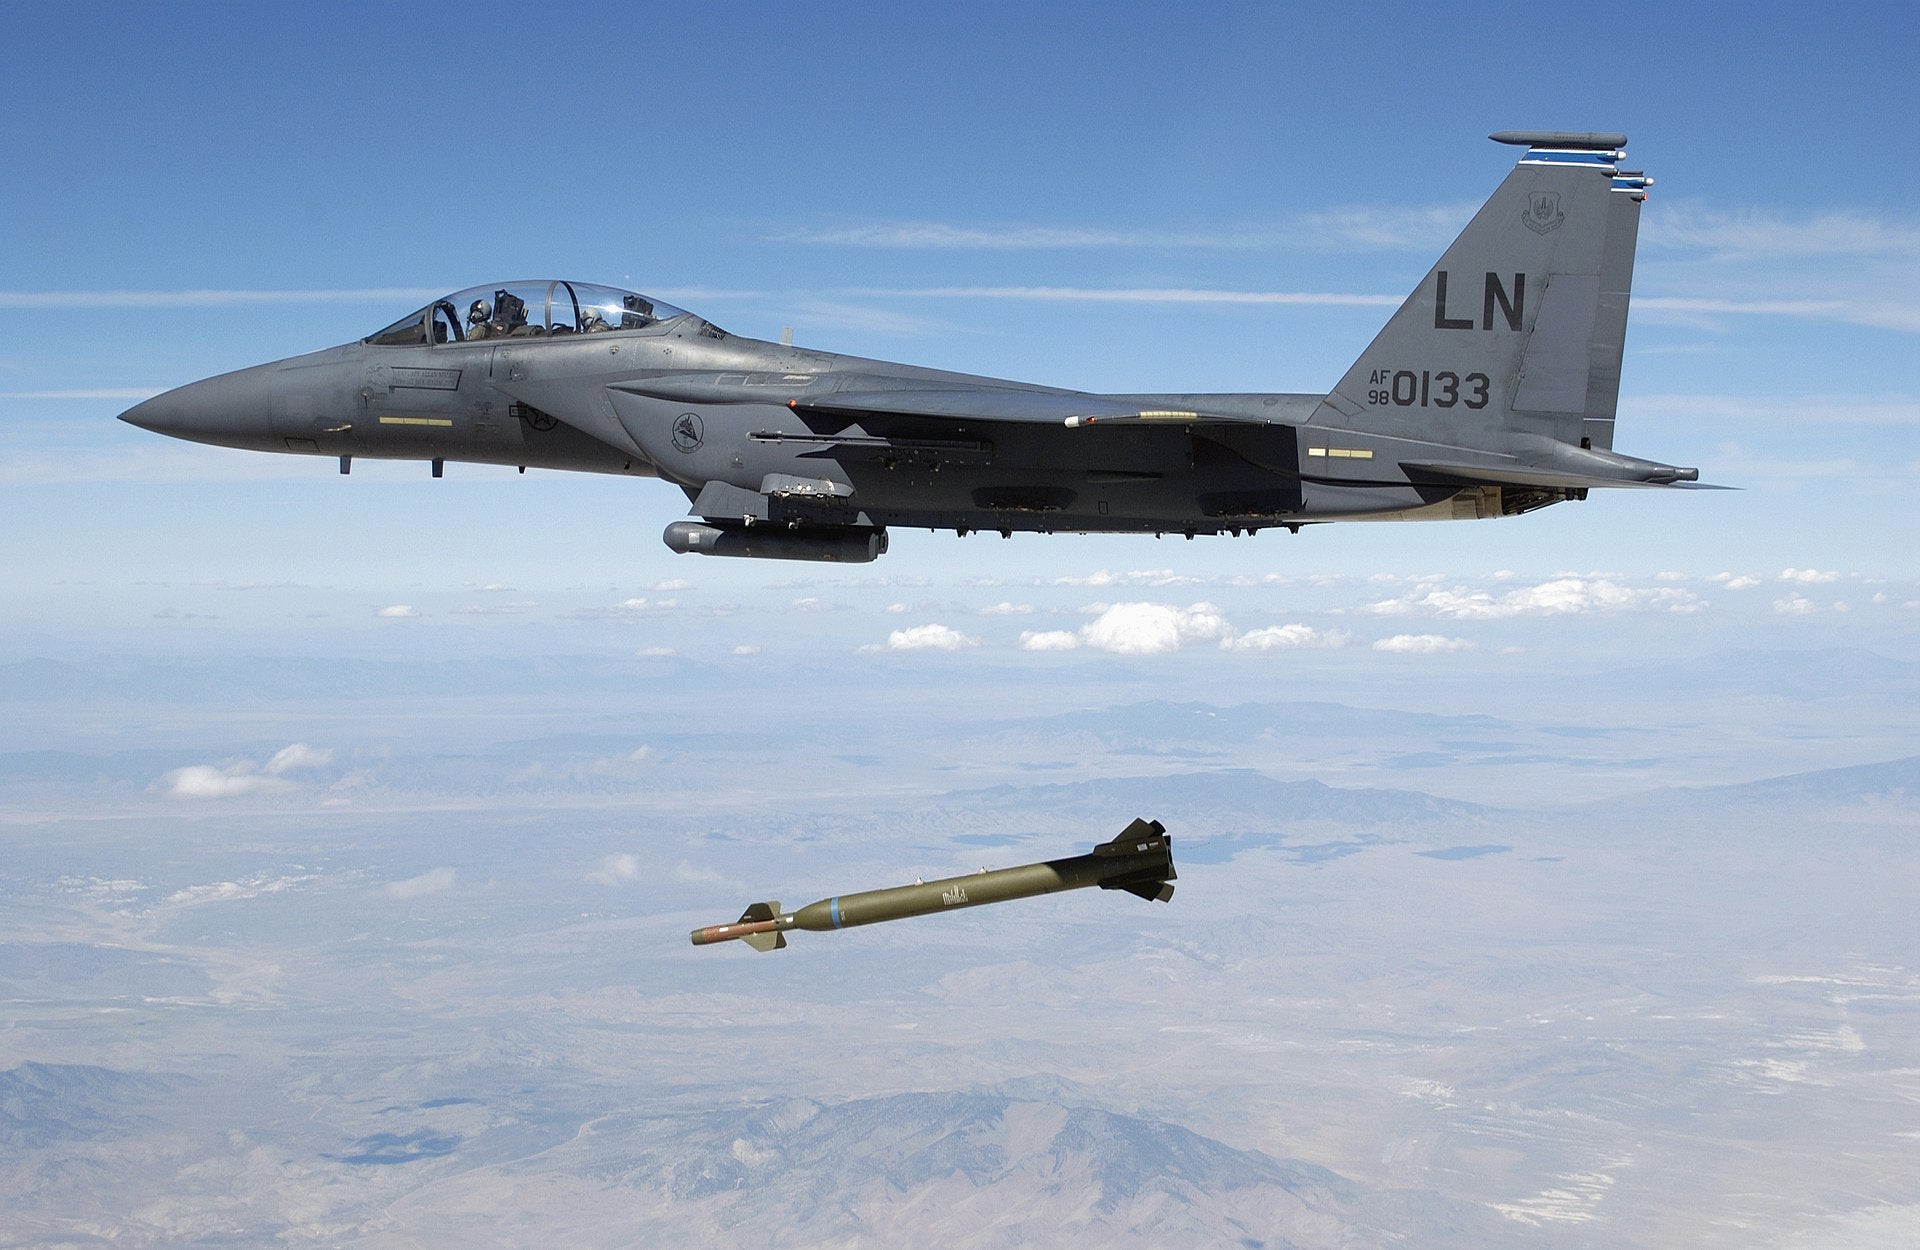 A US Air Force (USAF) F-15E Strike Eagle aircraft from the 492nd Fighter Squadron, Royal Air Force (RAF) Lakenheath, United Kingdom (UK) releases a GBU-28 "Bunker Buster" 5,000-pound Laser-Guided Bomb over the Utah Test and Training Range during a weapons evaluation test hosted by the 86th Fighter Weapons Squadron (FWS) from Eglin AFB, Florida (FL).